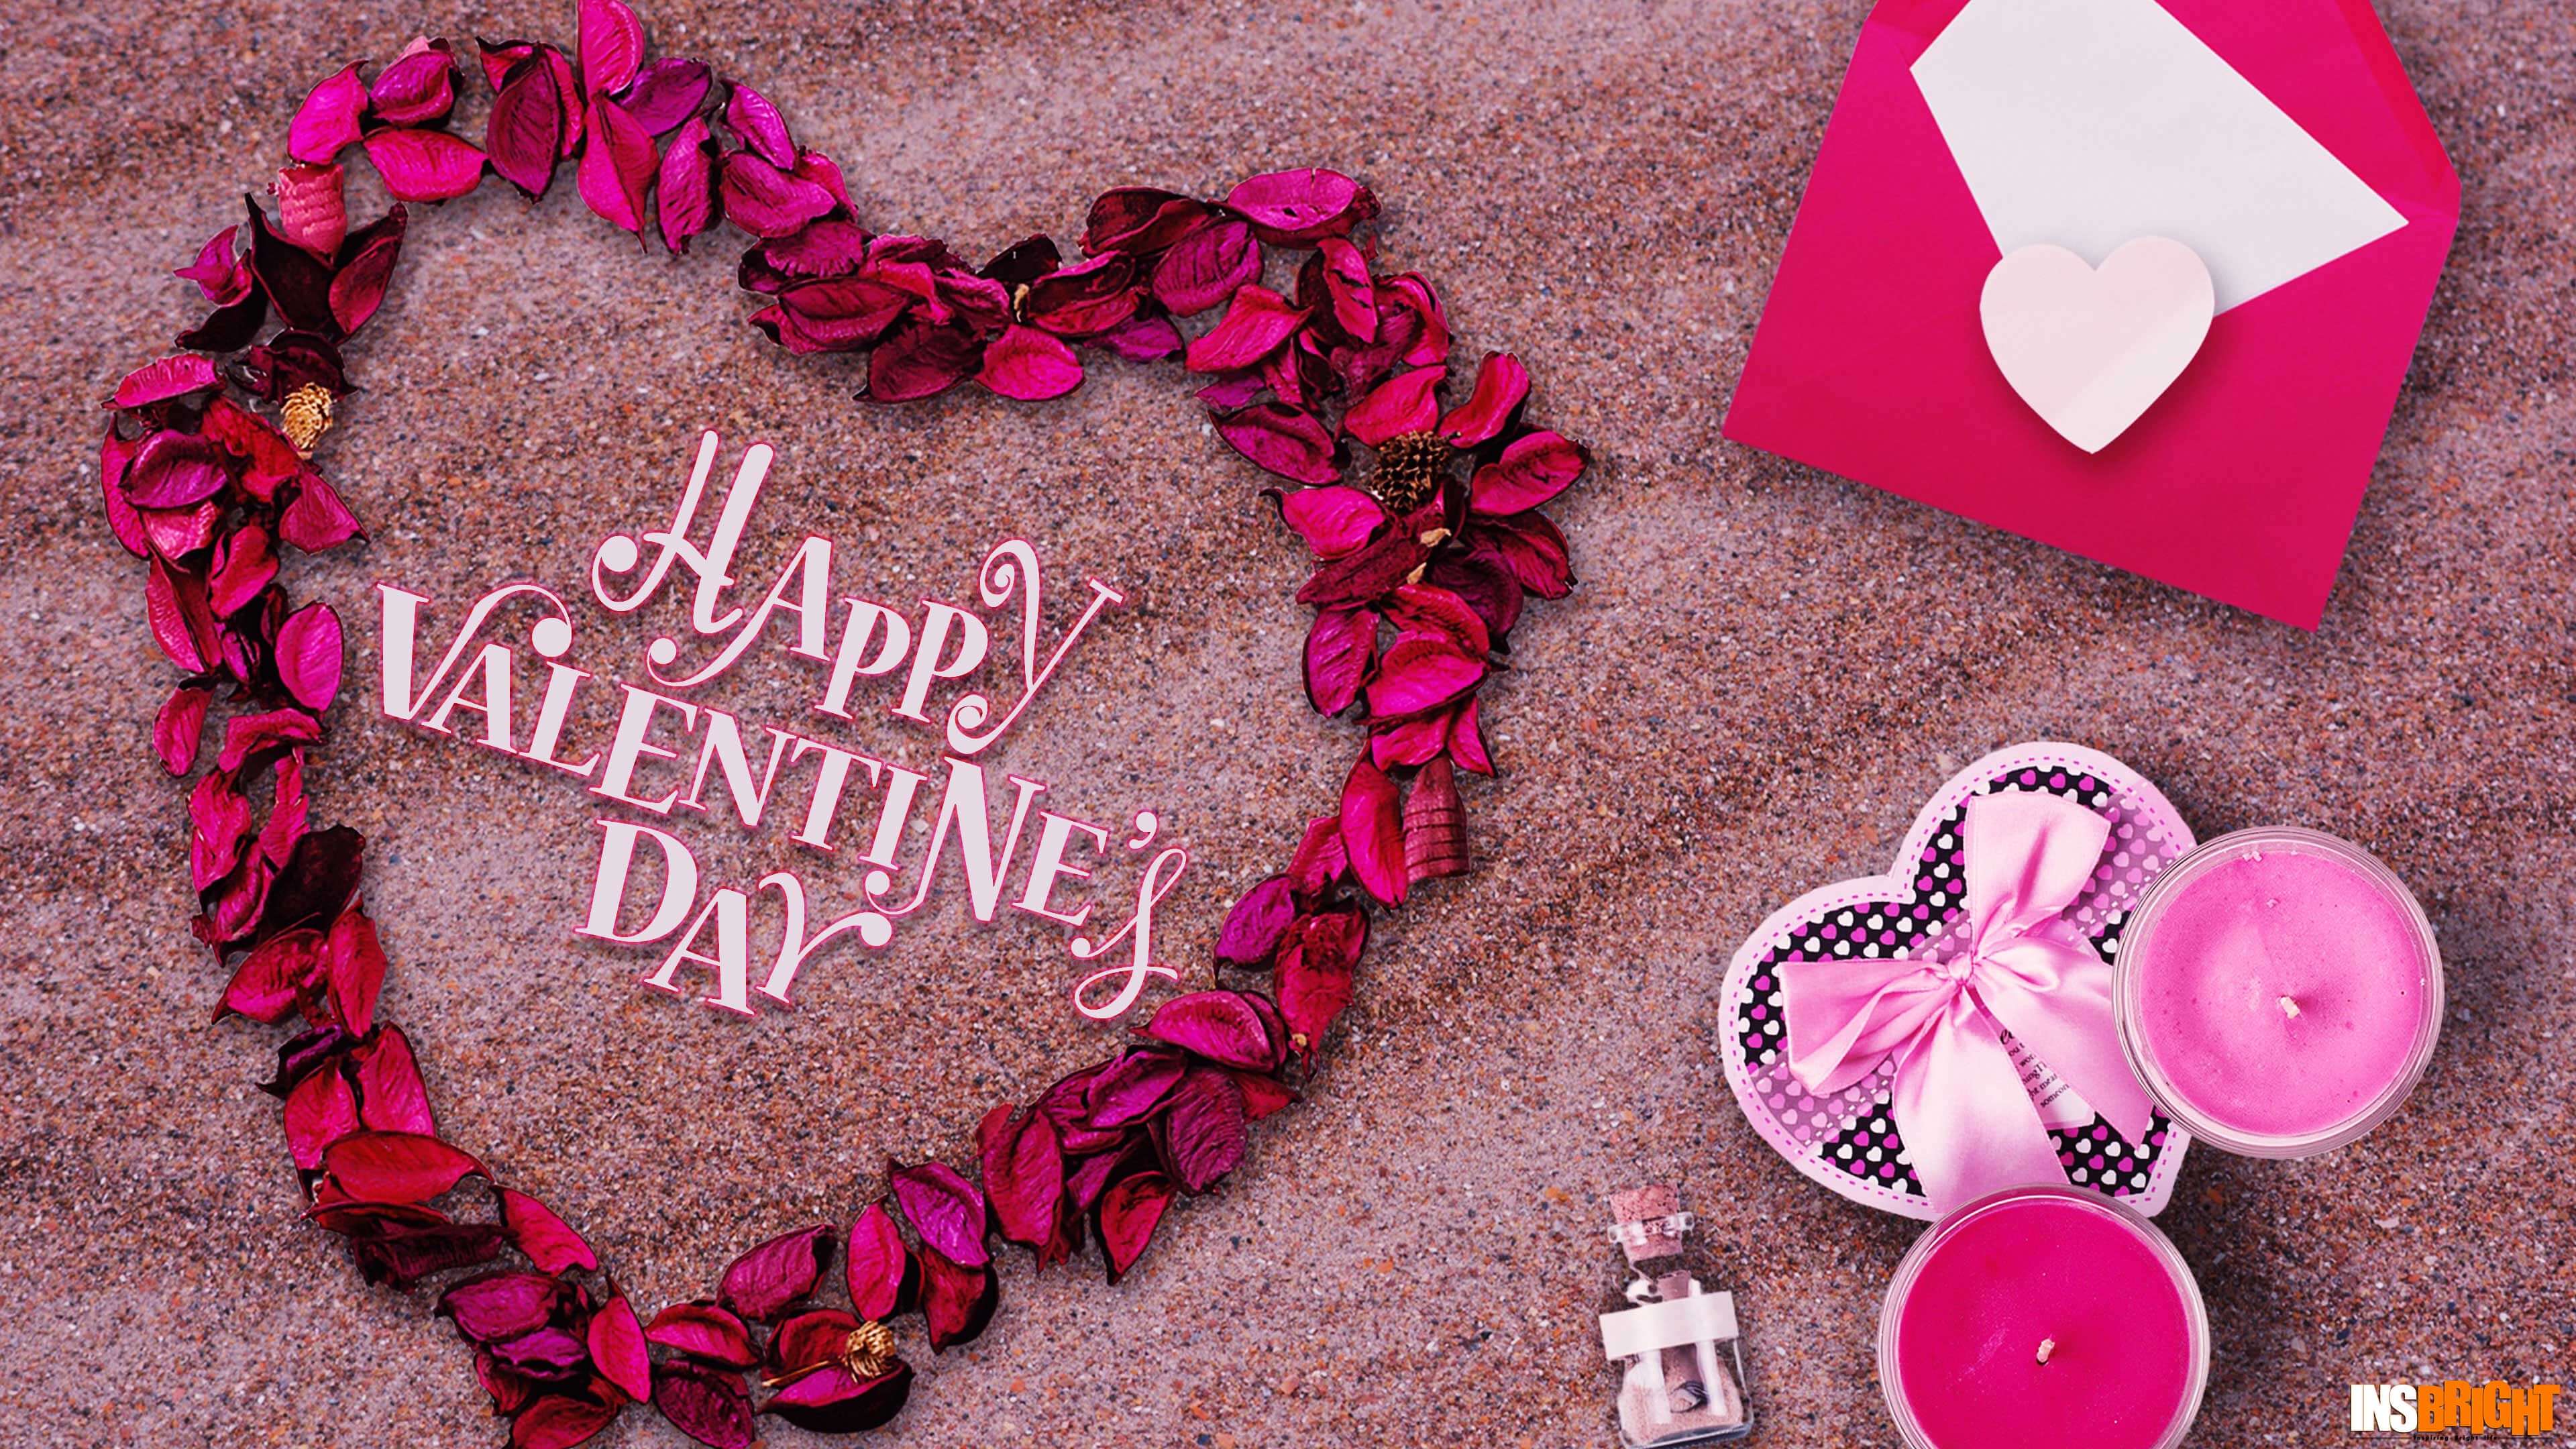 Happy Valentines Day Images - Valentine Day Pic Hd - 3840x2160 Wallpaper -  